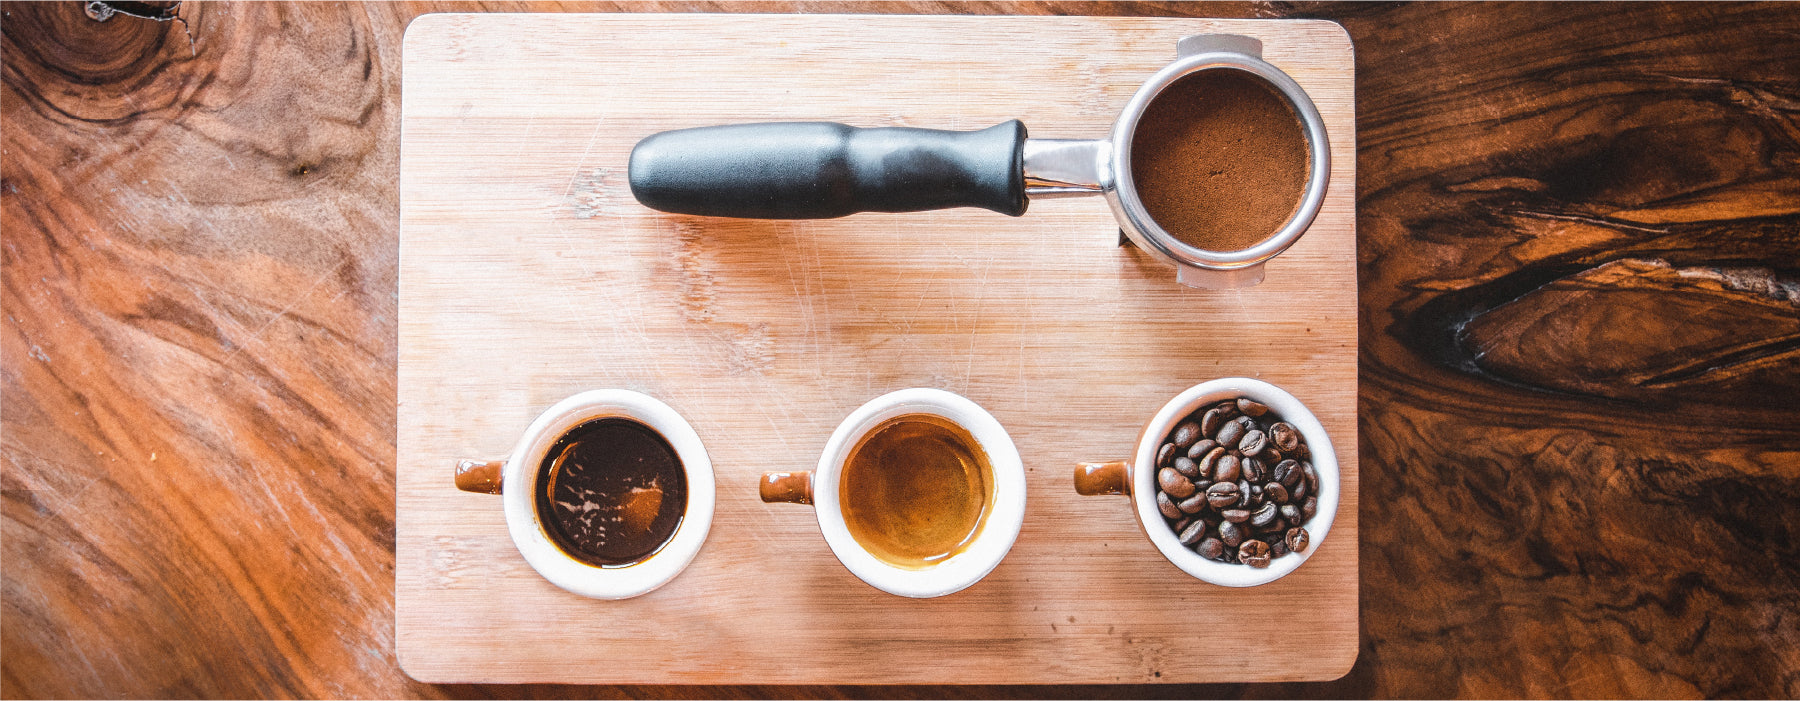 Why Fresh Espresso Is the Best Espresso (And How to Make It) by Coffee Life, an EspressoWorks blog